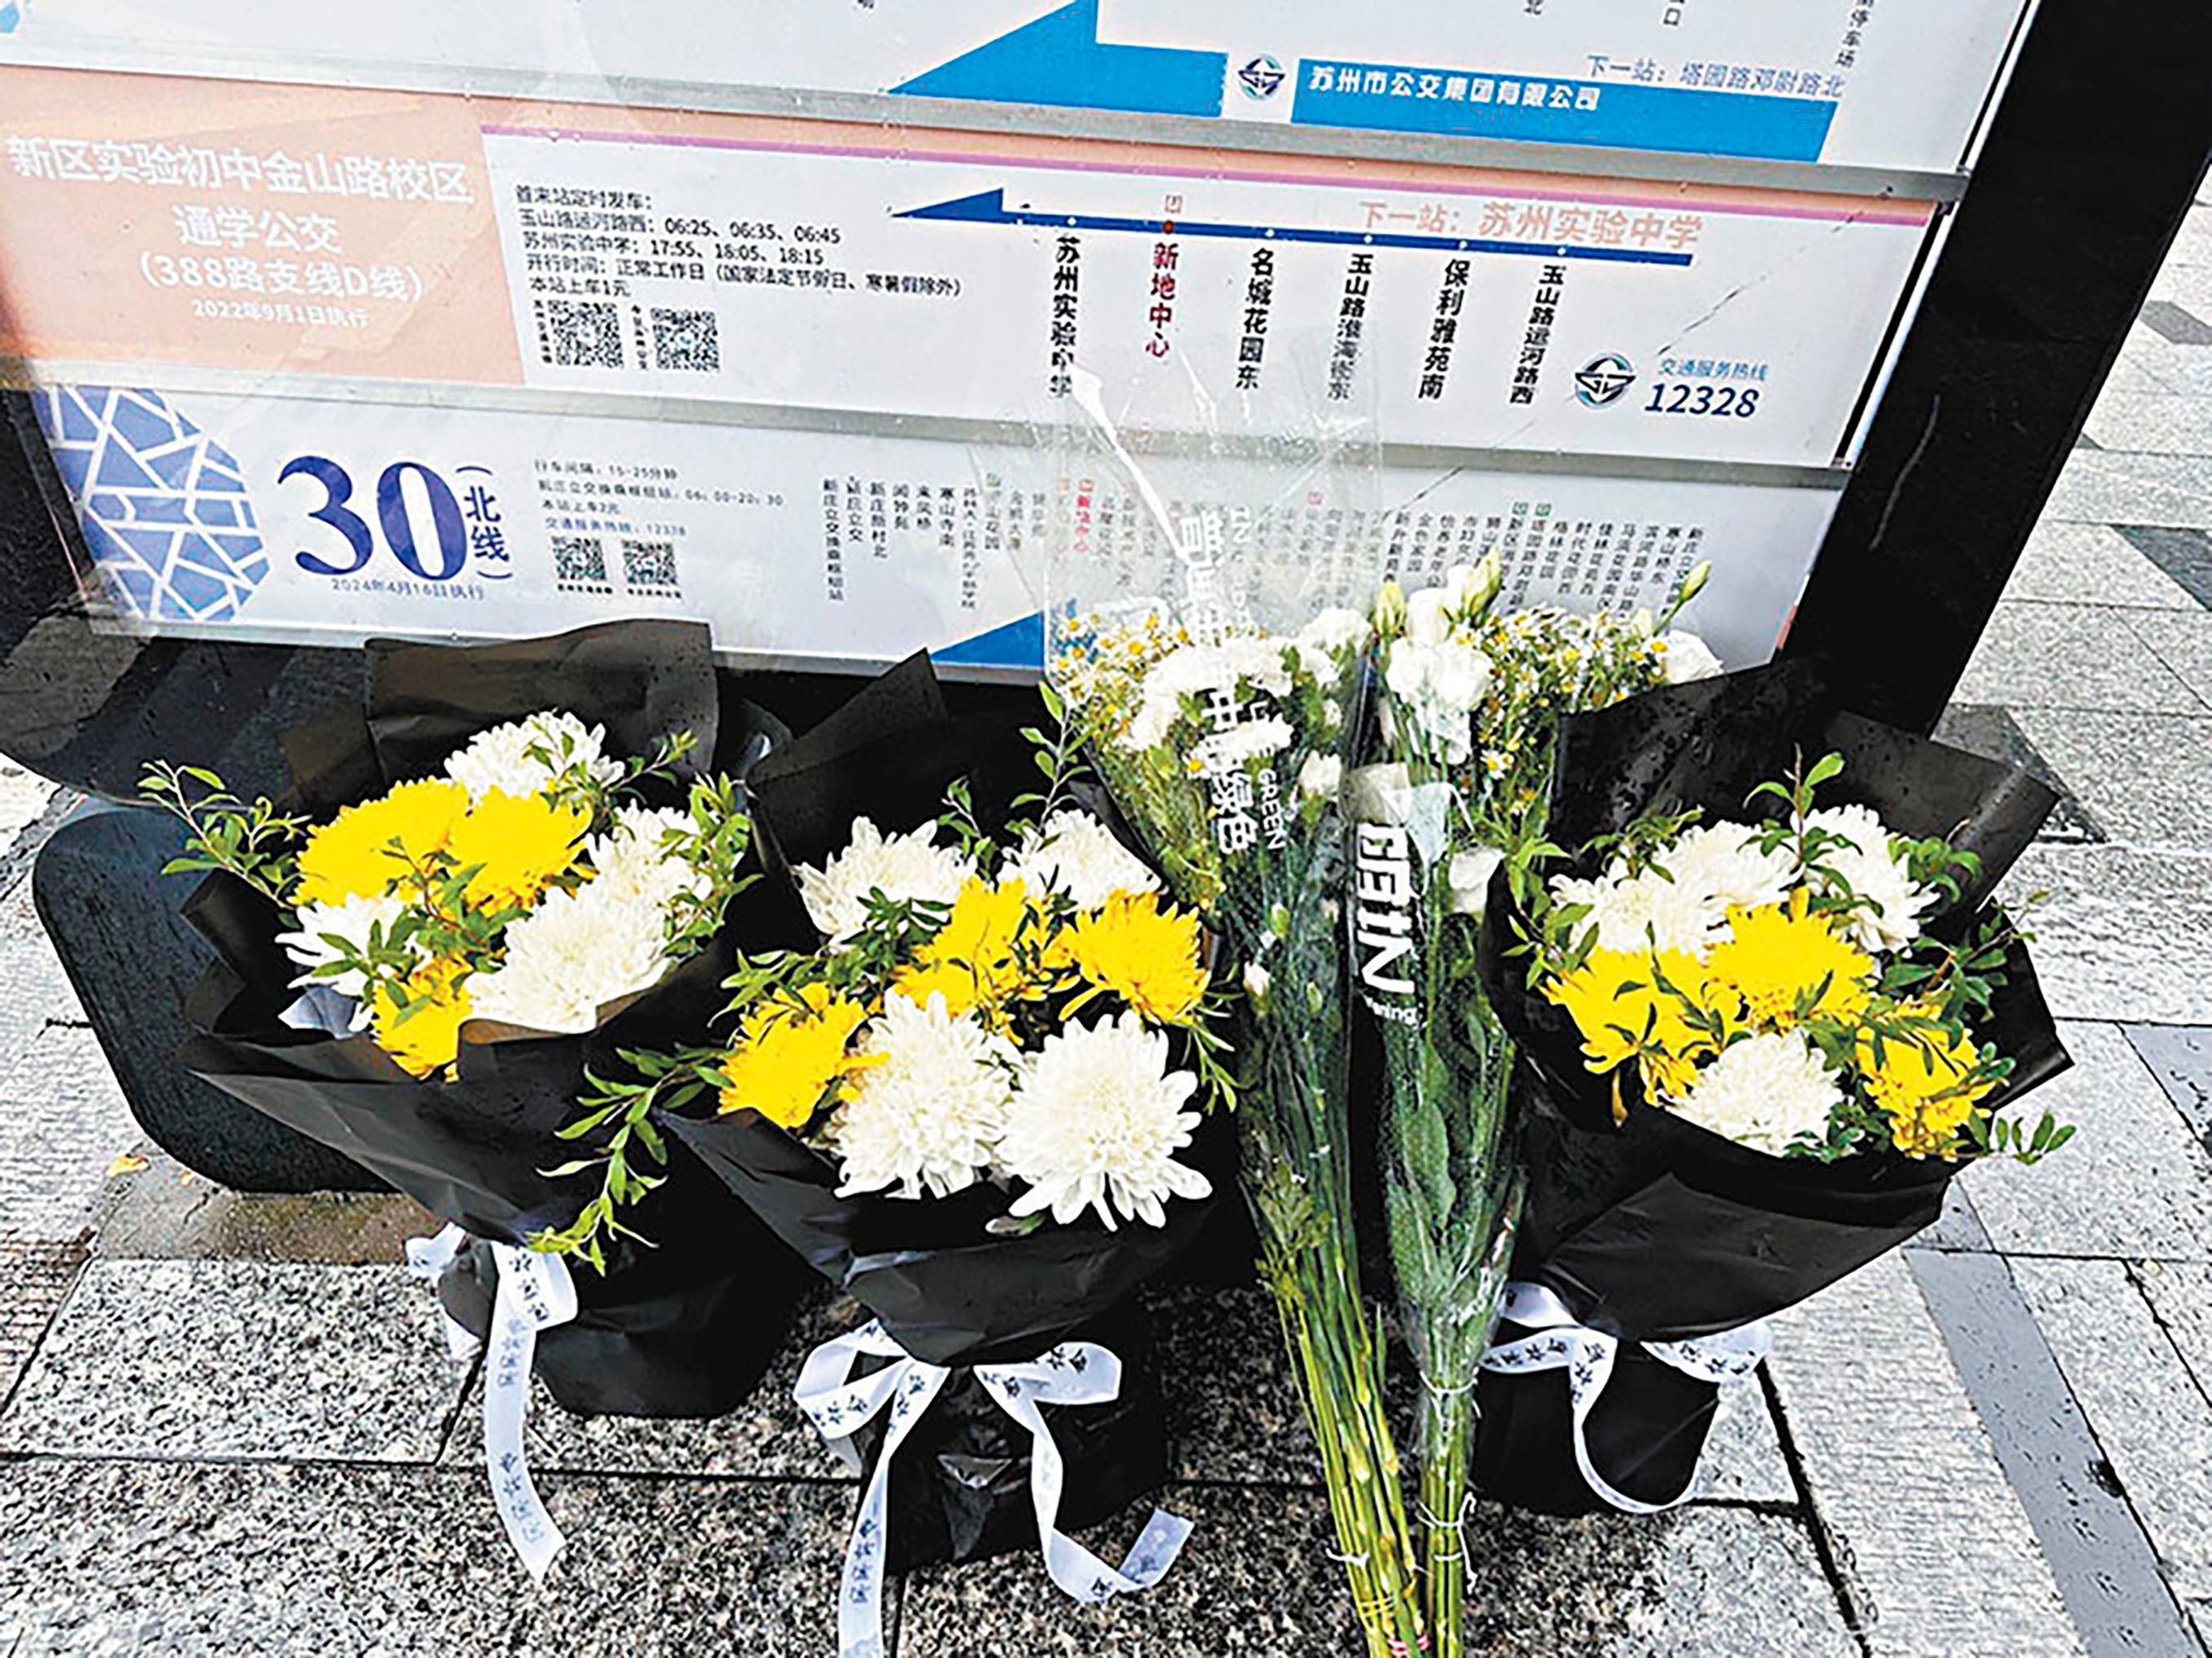 Flowers lay in tribute in Suzhou to school bus attendant Hu Youping died on Wednesday from wounds she sustained trying to subdue a knife-wielding attacker at a bus stop. Photo: Weibo